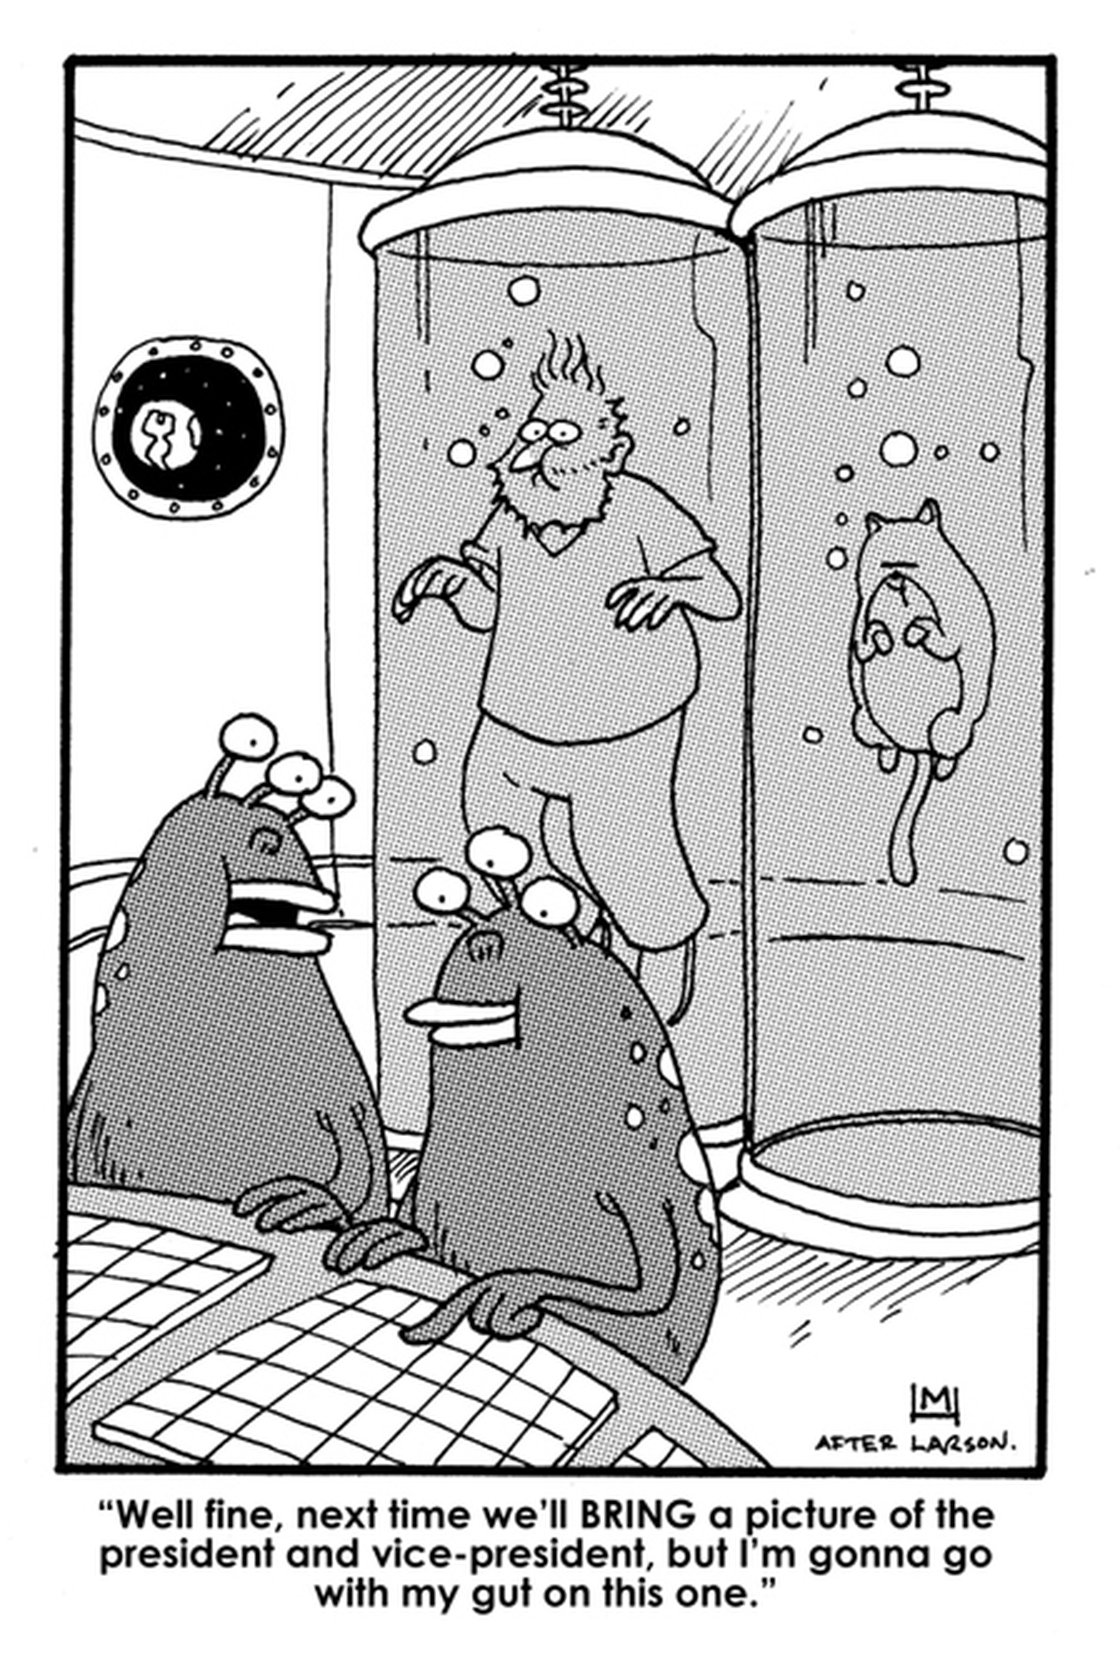 FarSide Fusenews: Book Baths and Far Side   What More Could You Want in Life?